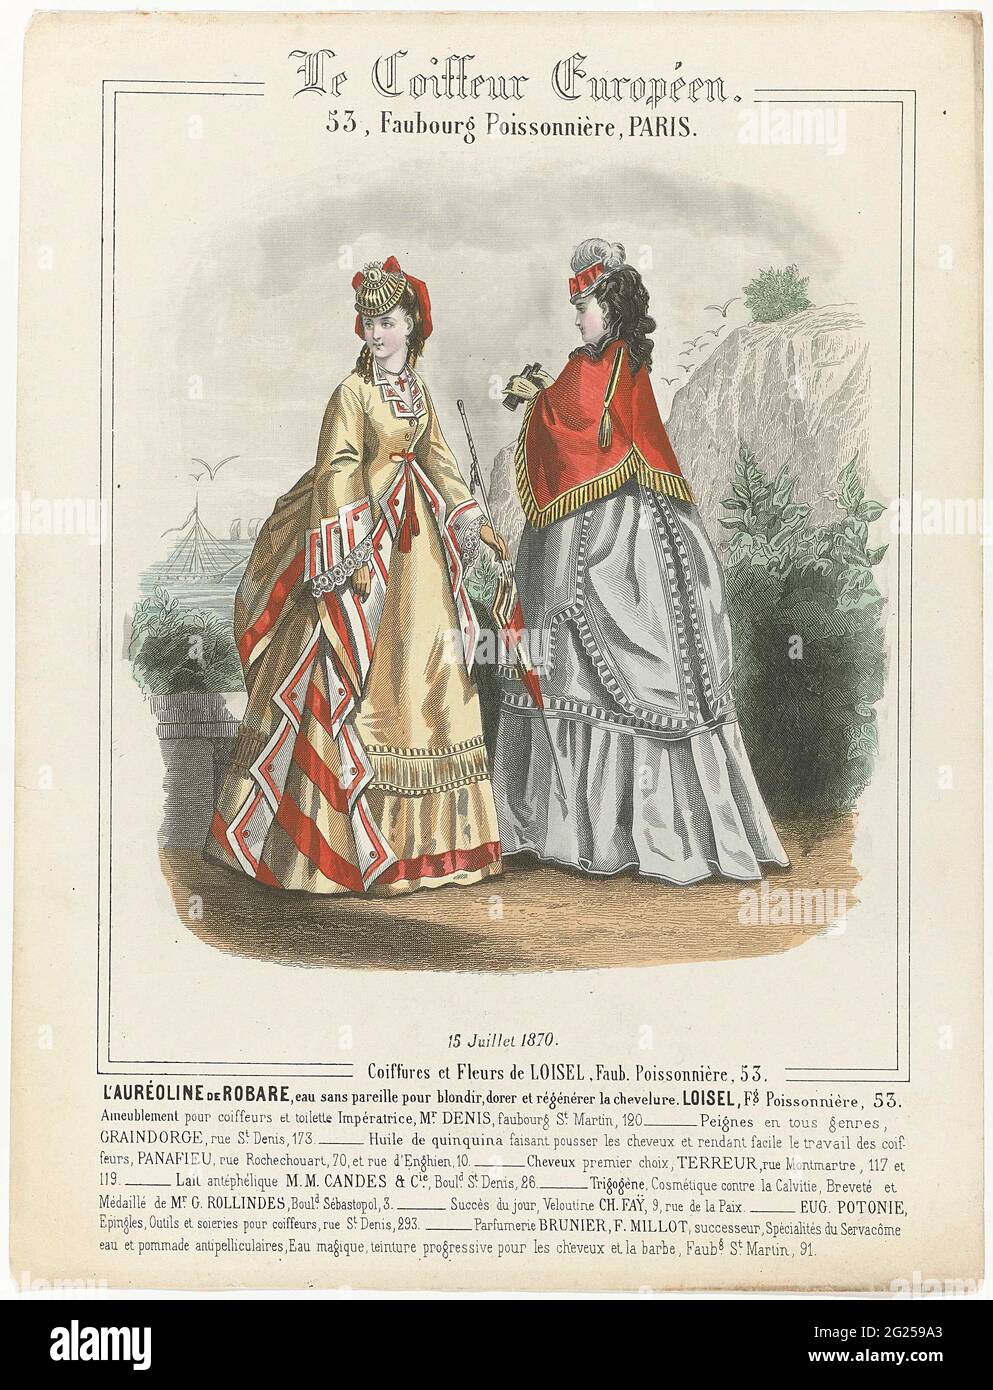 Le Coiffeur Européan, 15 Juillet 1870: L'Auréoline de Robar (...). Two  women, one of whom seen on the back by the sea. According to the caption,  the hairstyles and flowers of Liosel